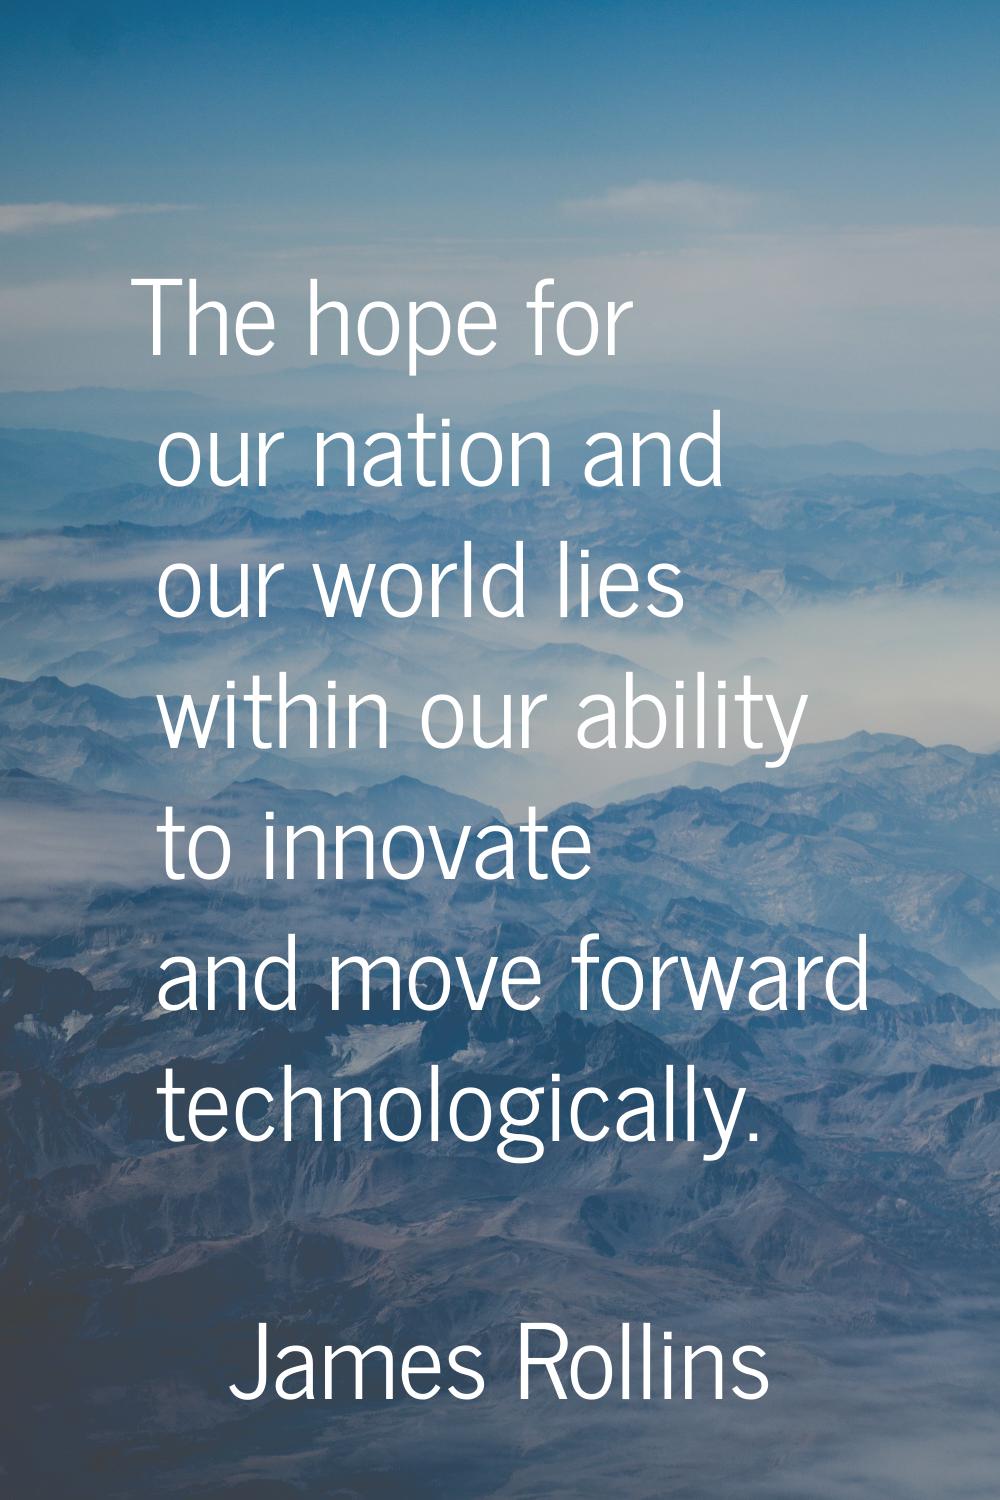 The hope for our nation and our world lies within our ability to innovate and move forward technolo